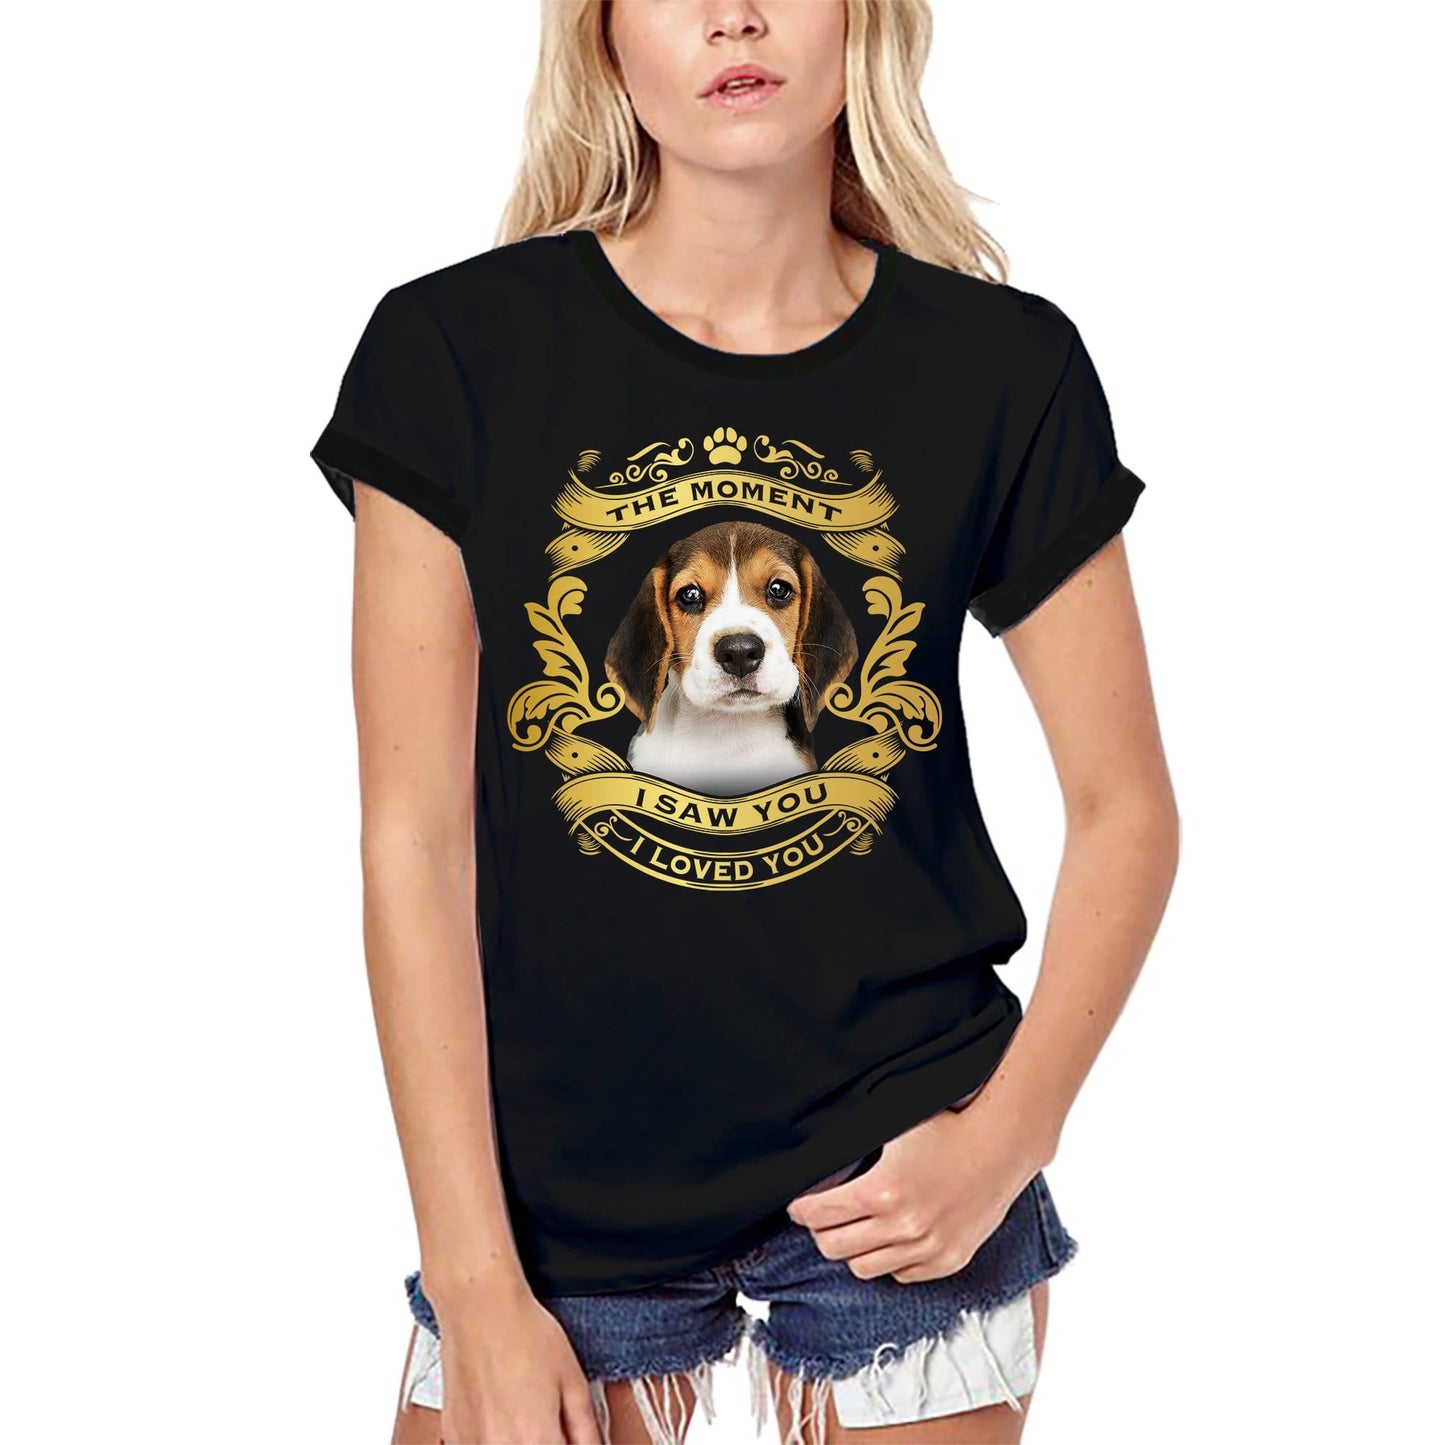 ULTRABASIC Women's Organic T-Shirt Beagle Dog - Moment I Saw You I Loved You Puppy Tee Shirt for Ladies